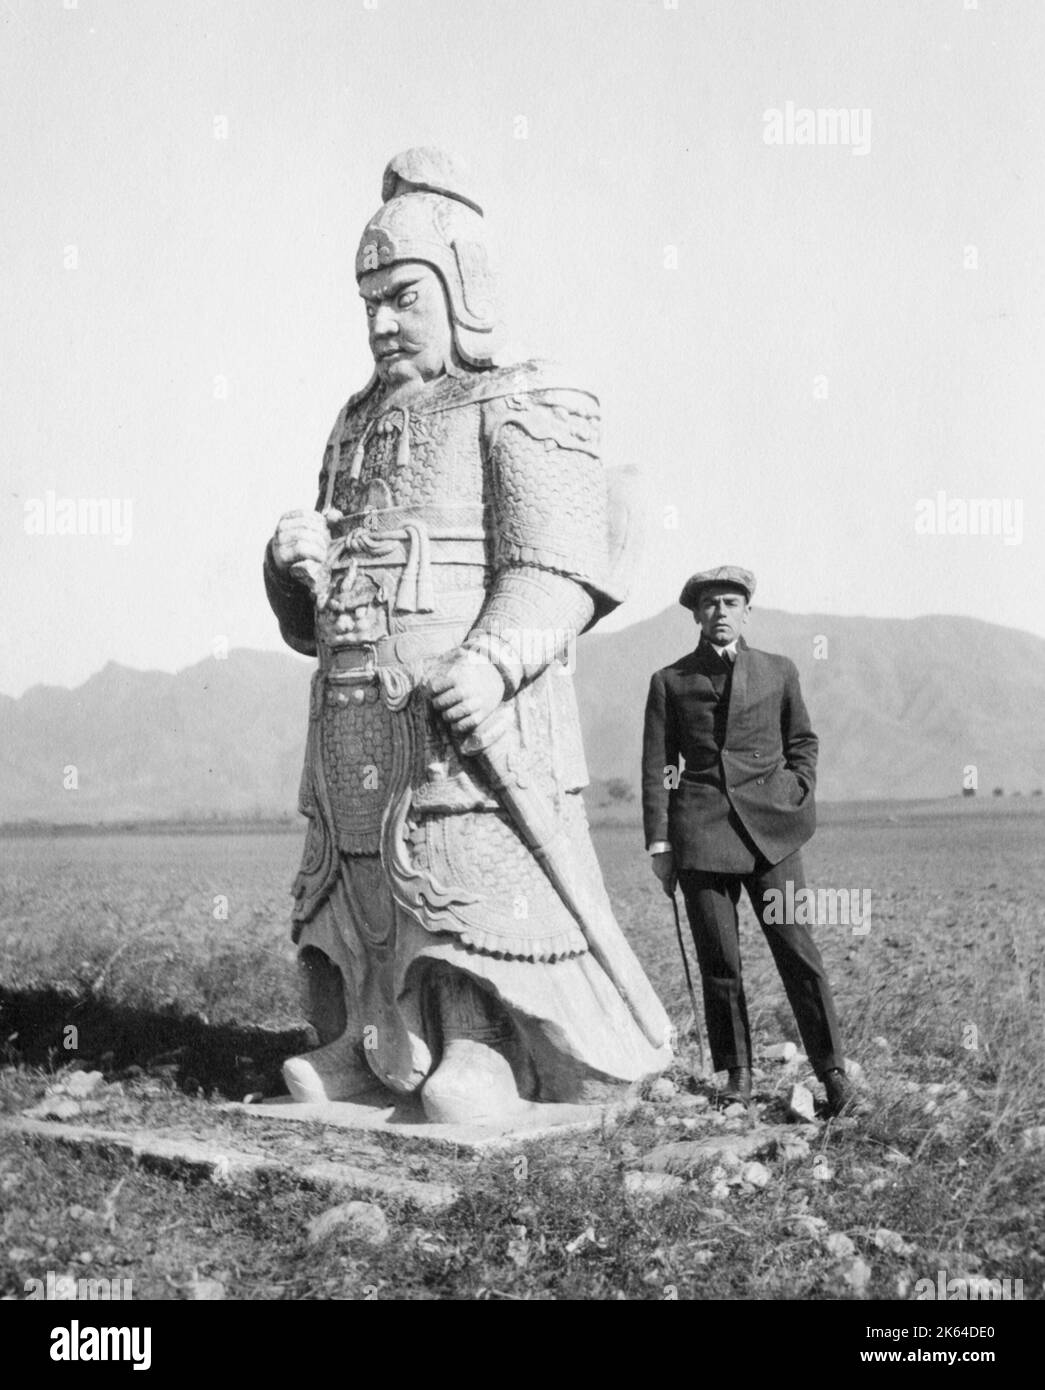 Stone warrior, soldier, Ming tombs, China, c.1910 Stock Photo